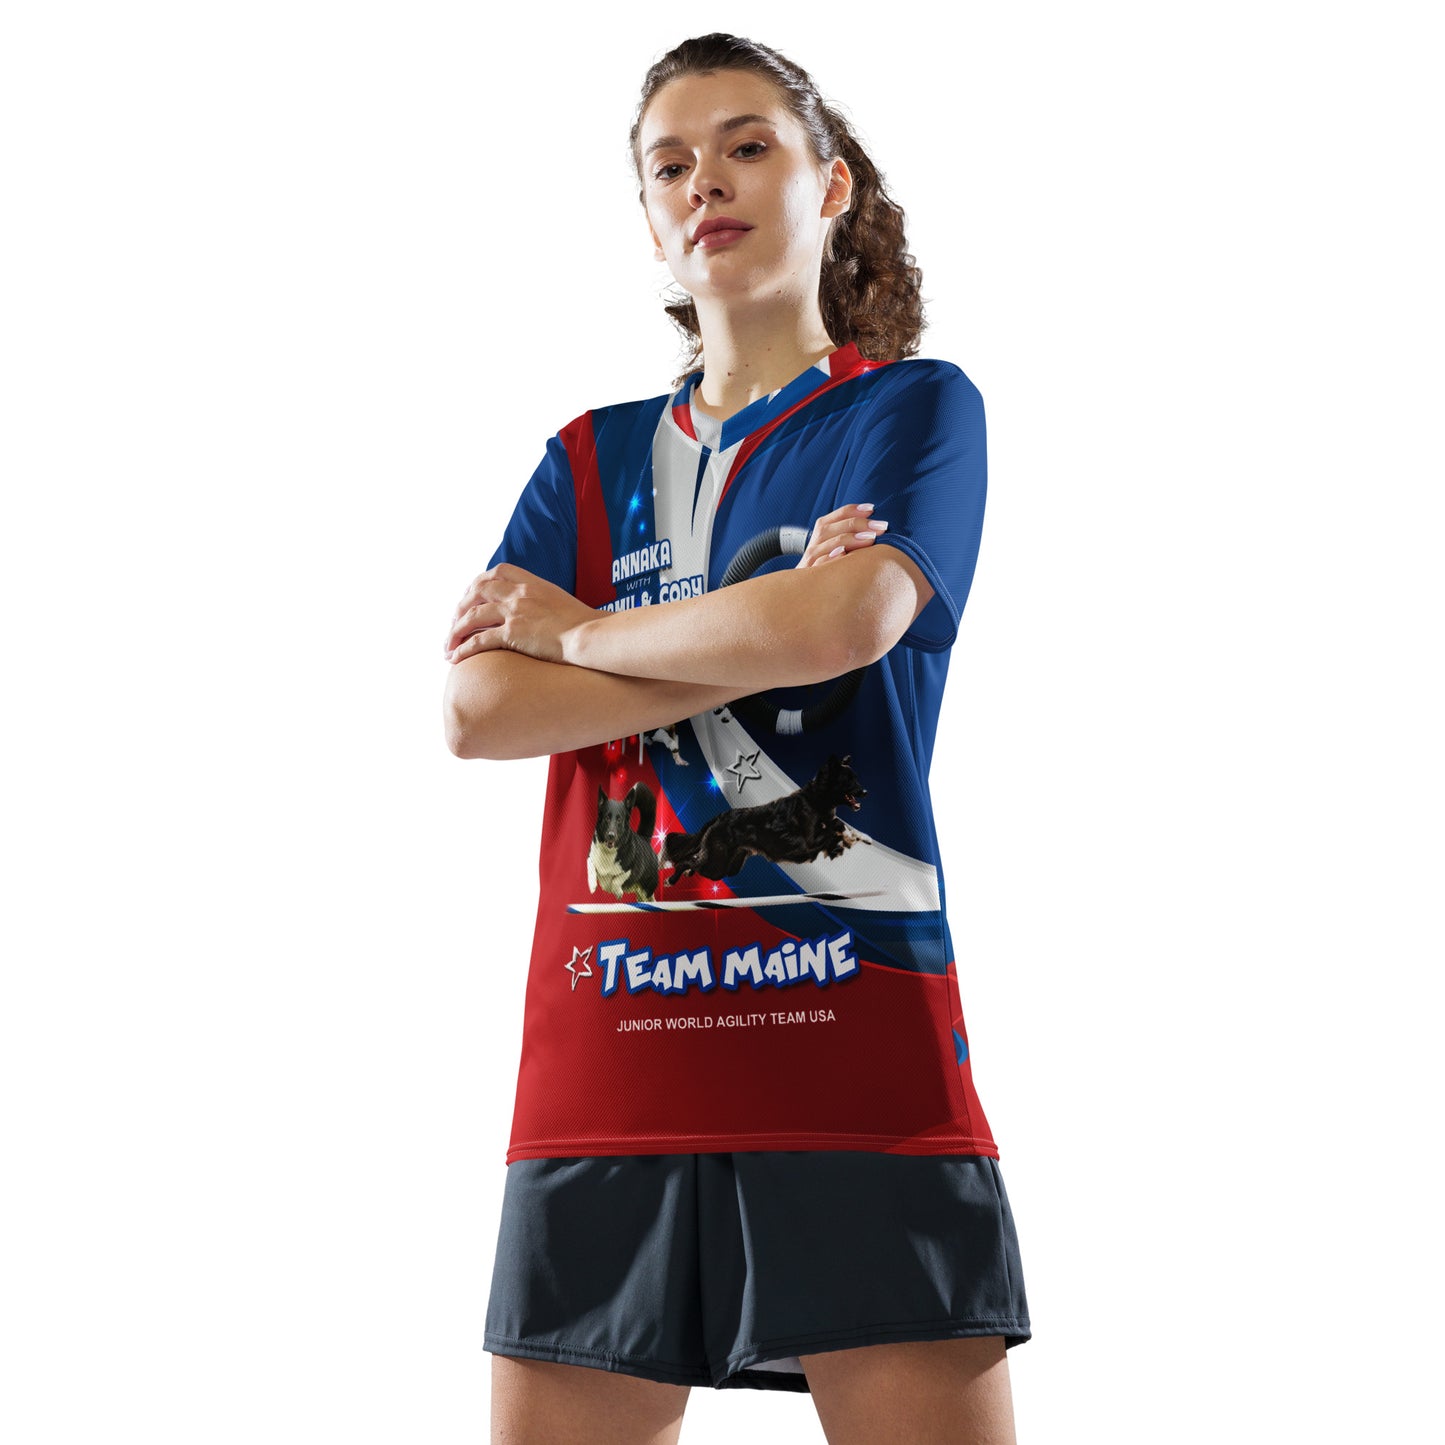 TEAM MAINE Recycled unisex sports jersey